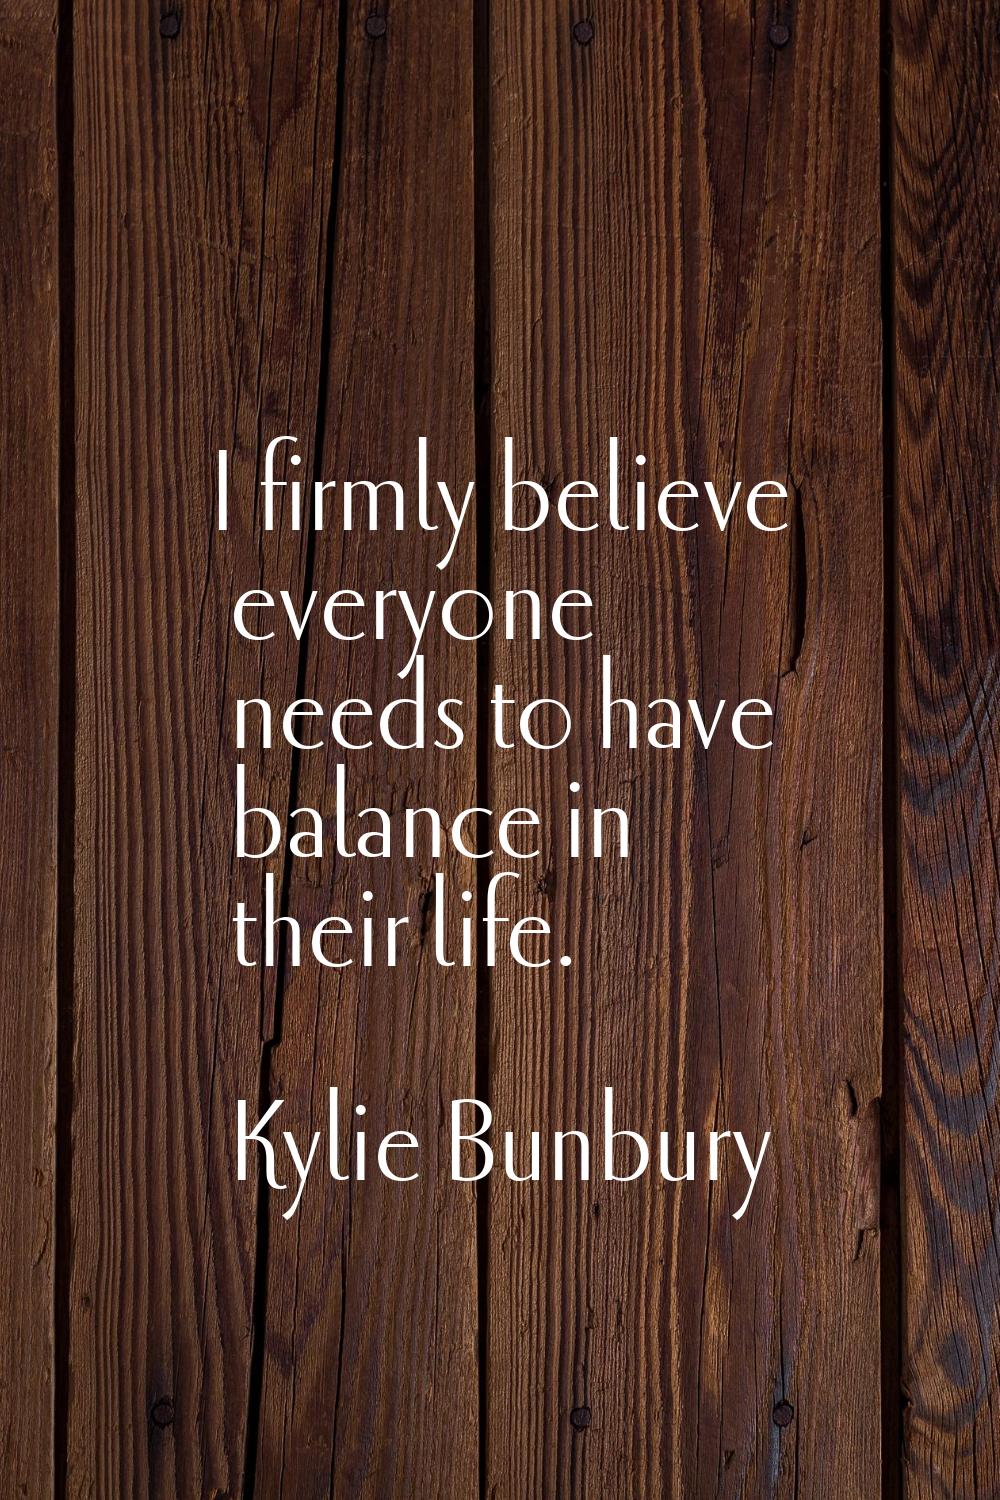 I firmly believe everyone needs to have balance in their life.